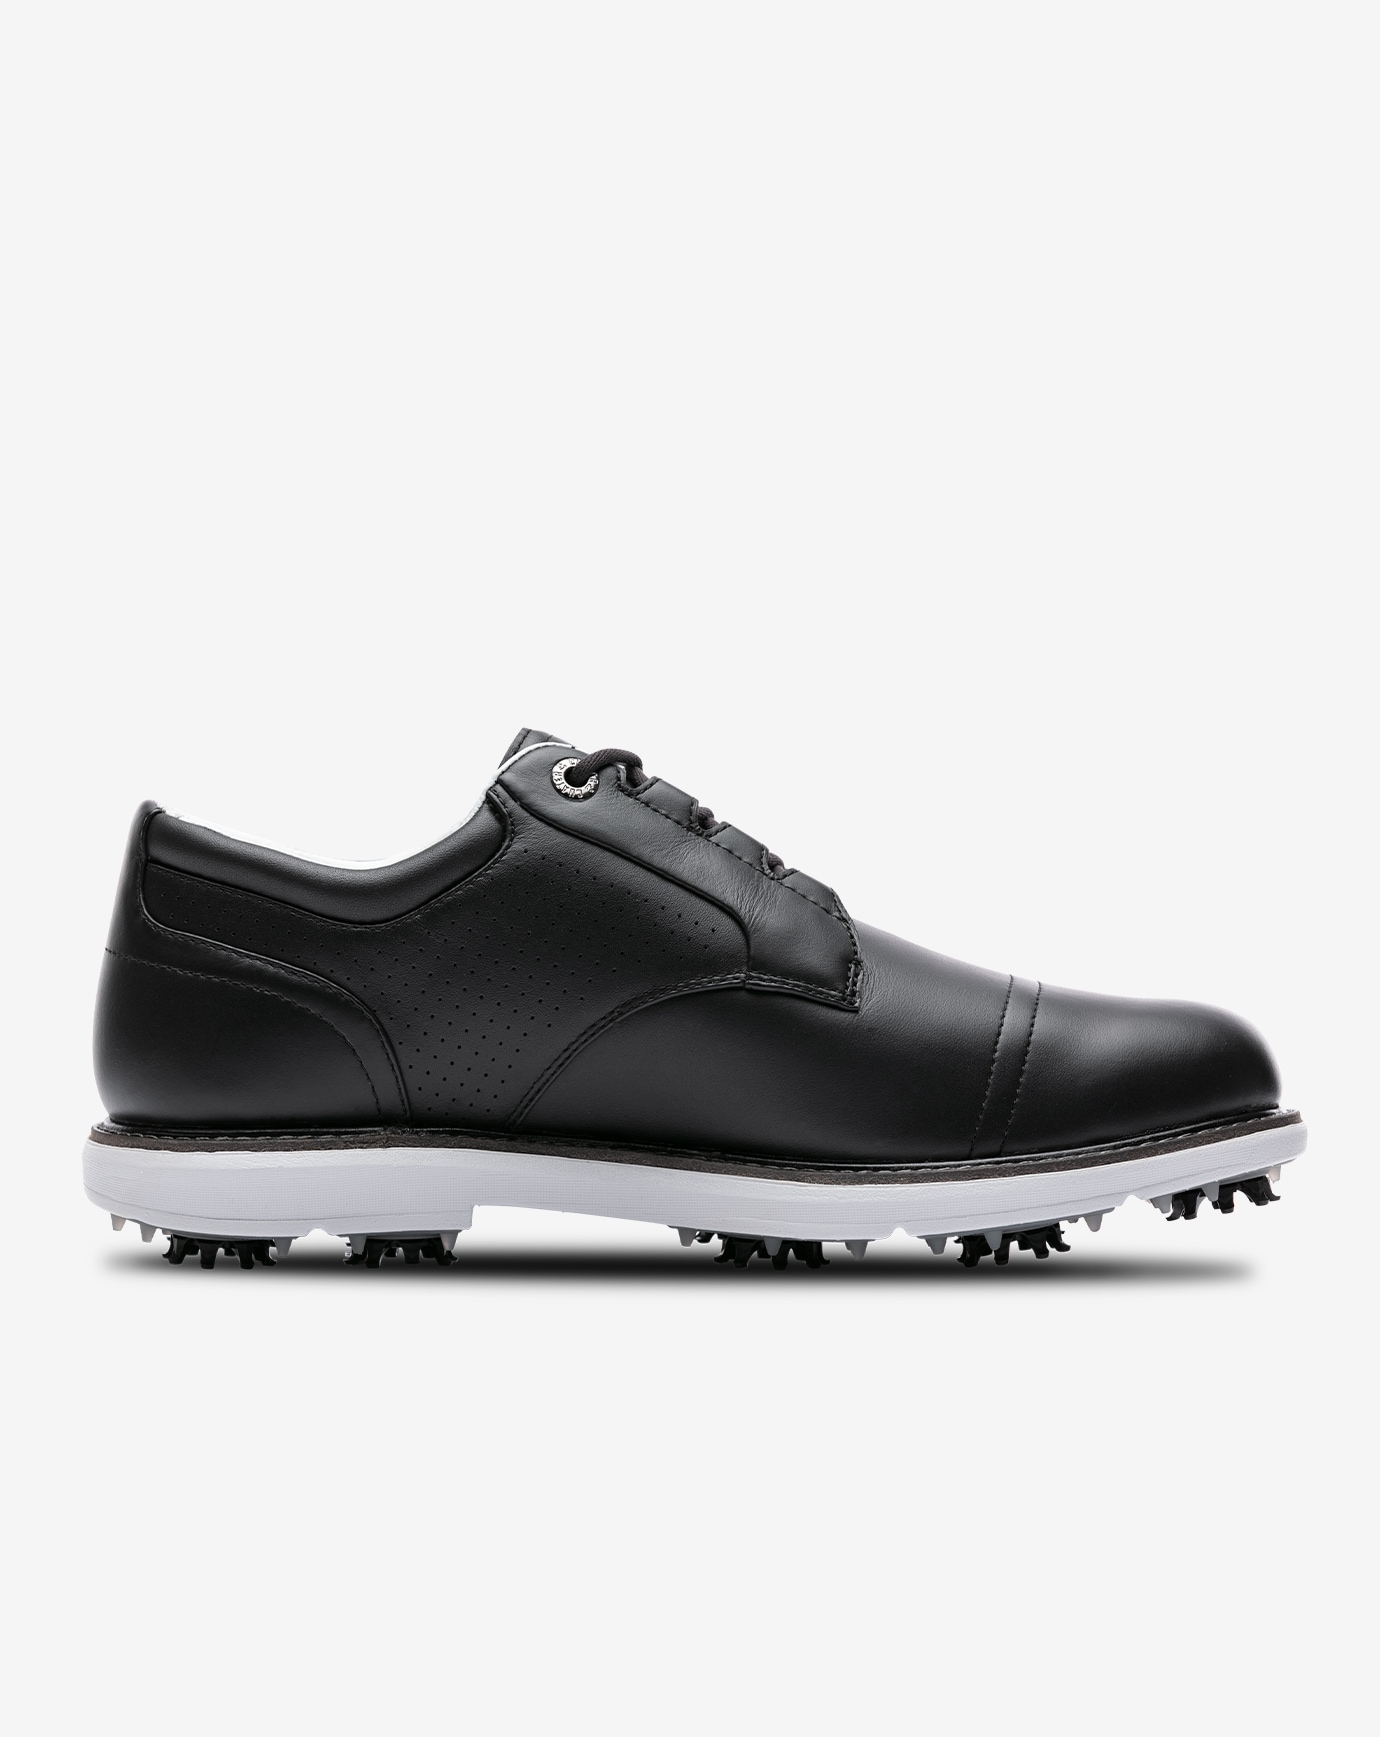 THE LEGEND SPIKED GOLF SHOE Image 3